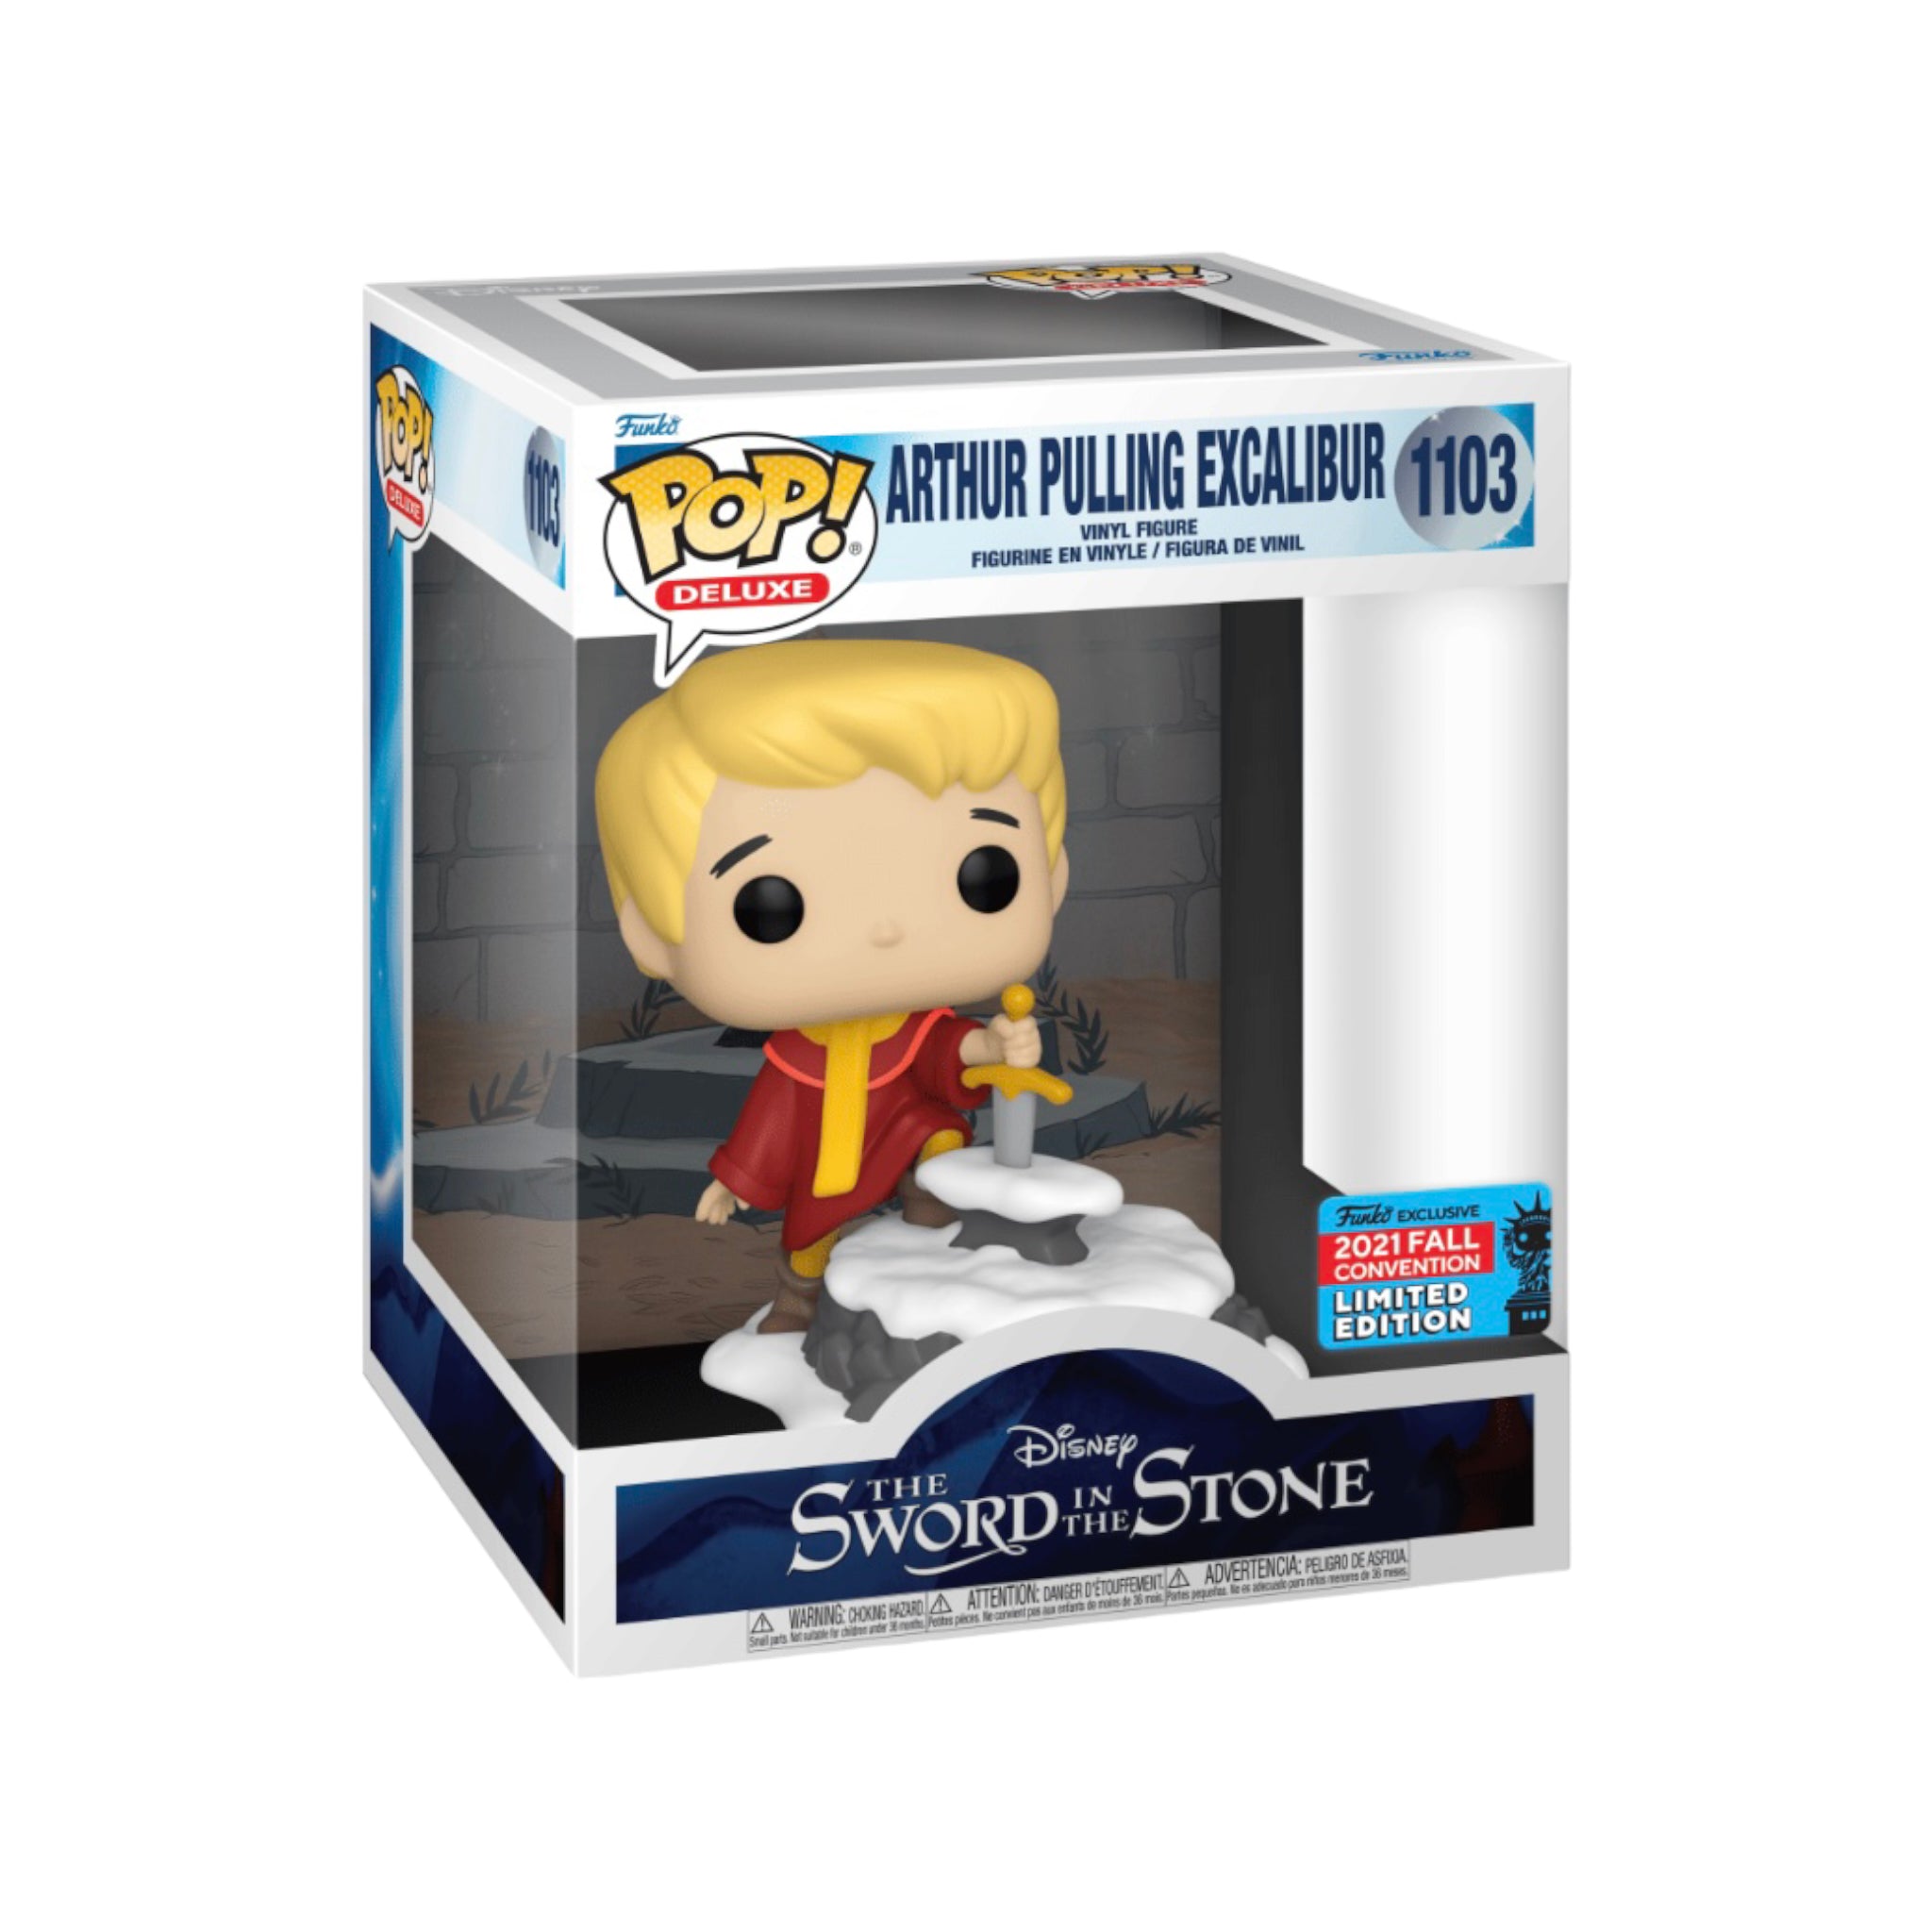 Arthur Pulling Excalibur #1103 Deluxe Funko Pop! - The Sword in The Stone - NYCC 2021 Shared Exclusive